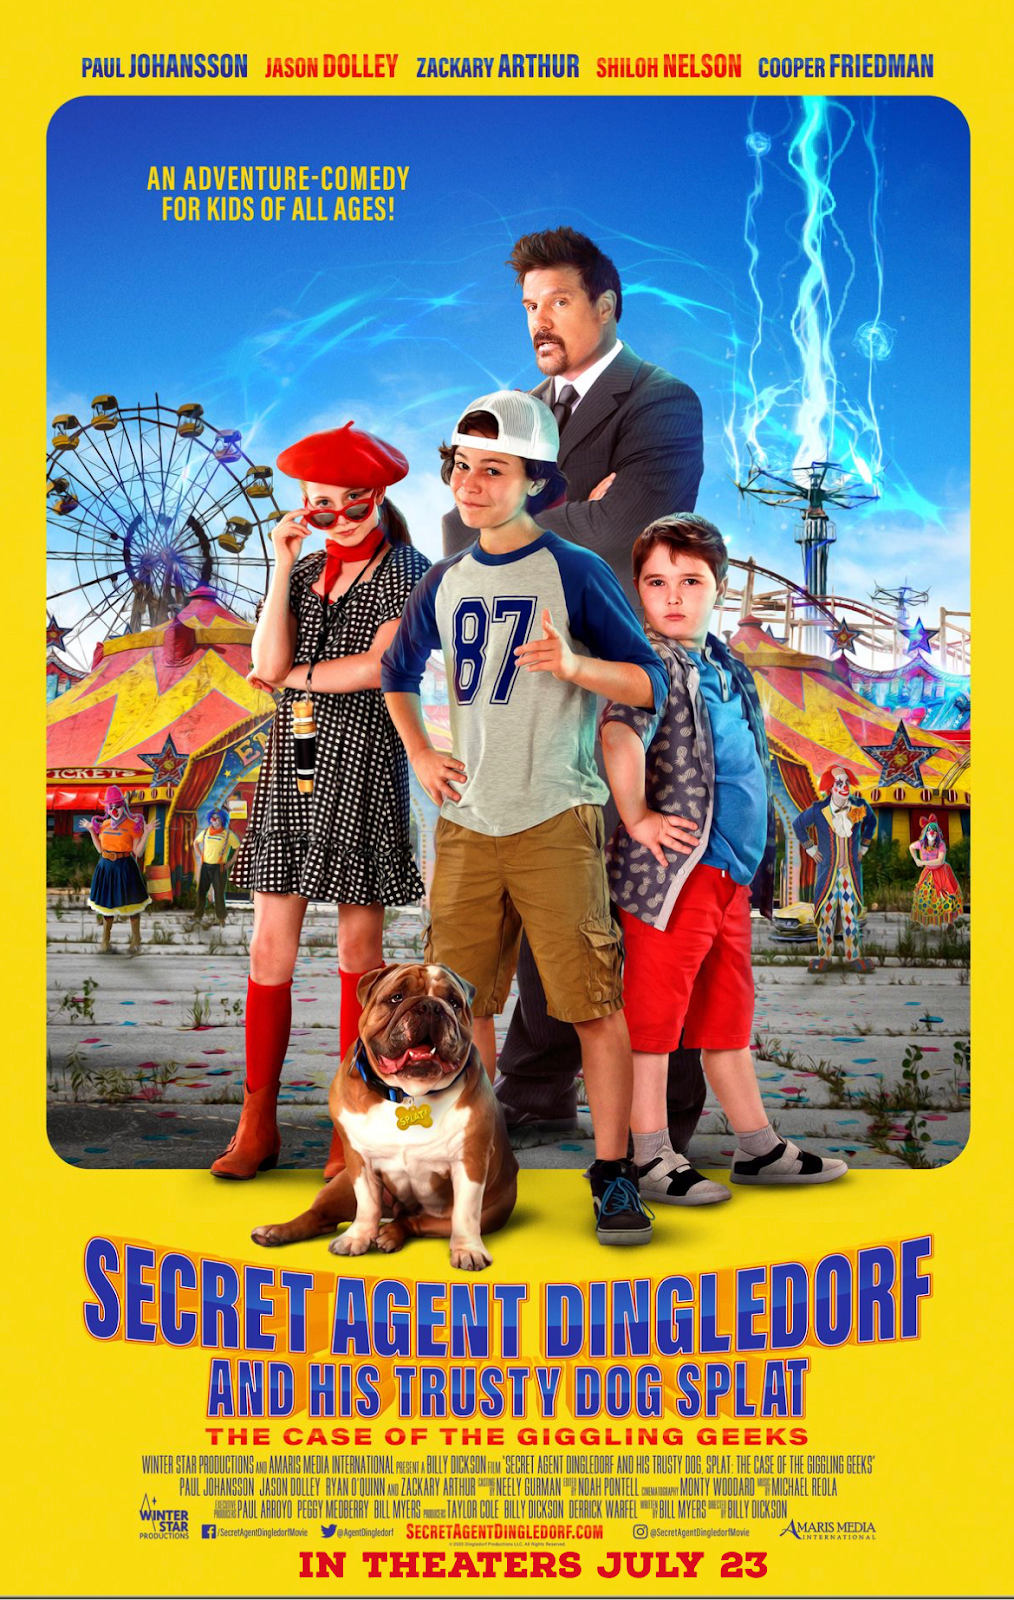 Secret Agent Dingledorf And His Trusty Dog Splat opens in theaters July 23rd